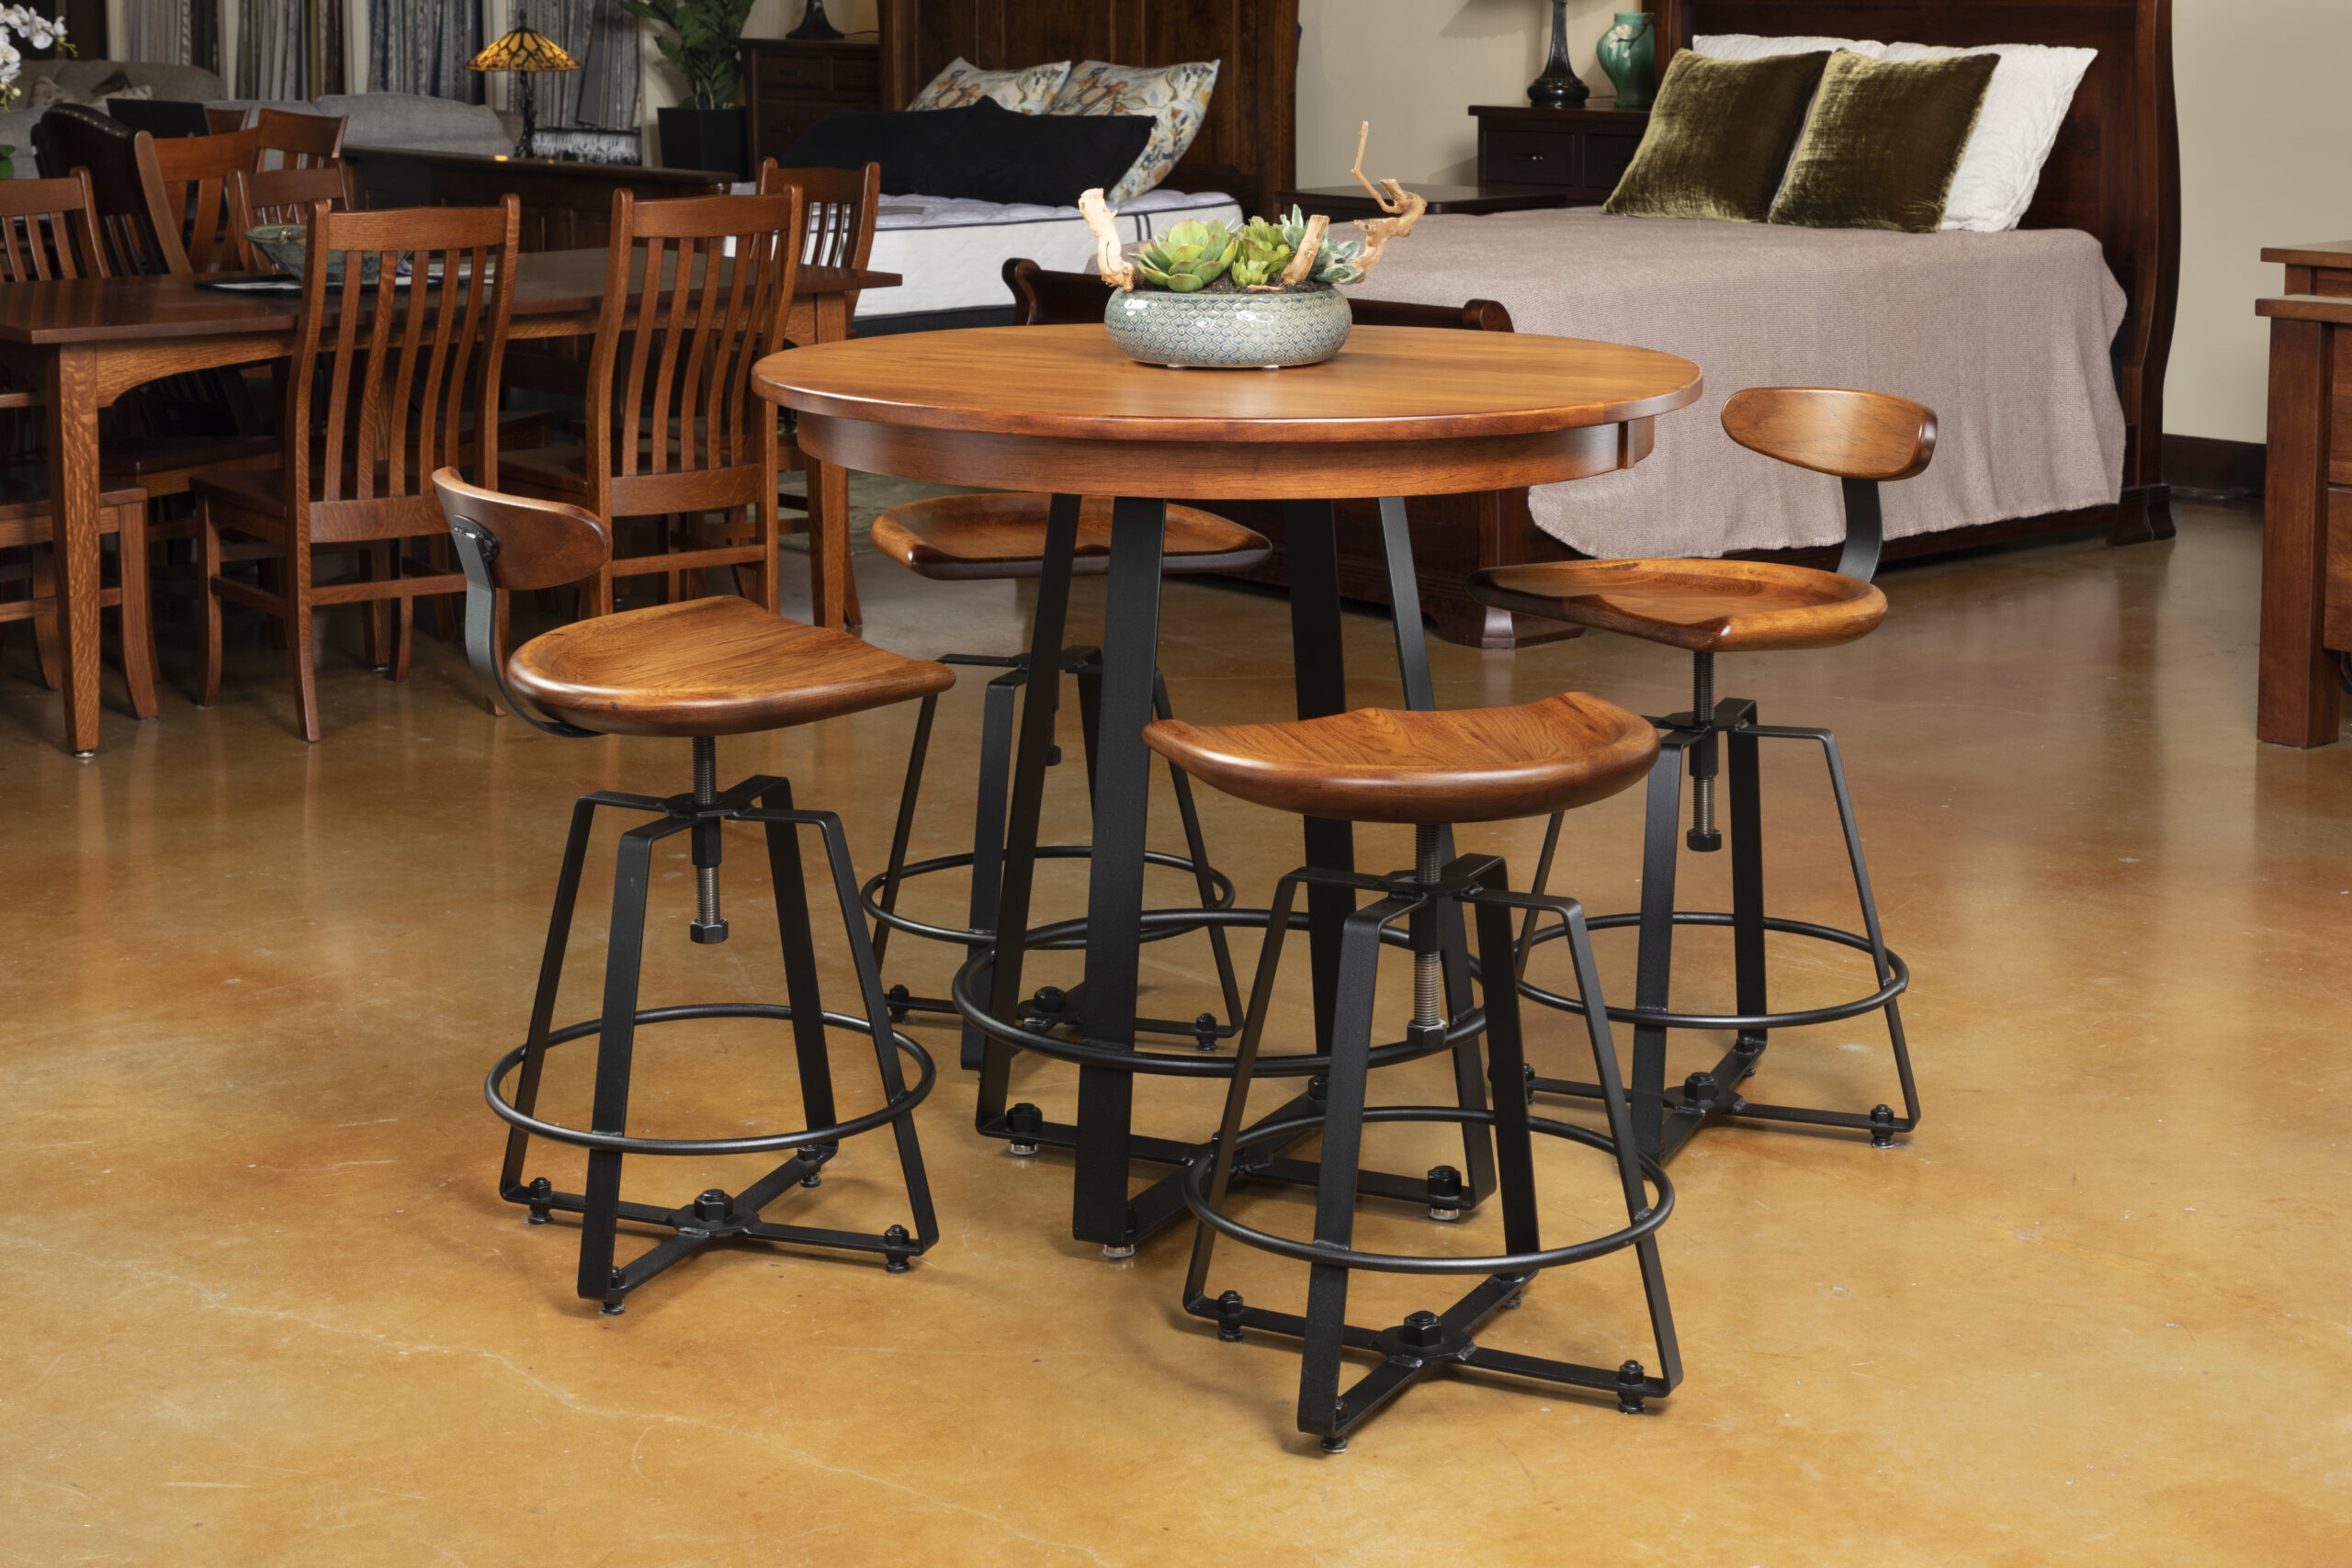 Pub Table with Iron Base and Wood Top with Barstools